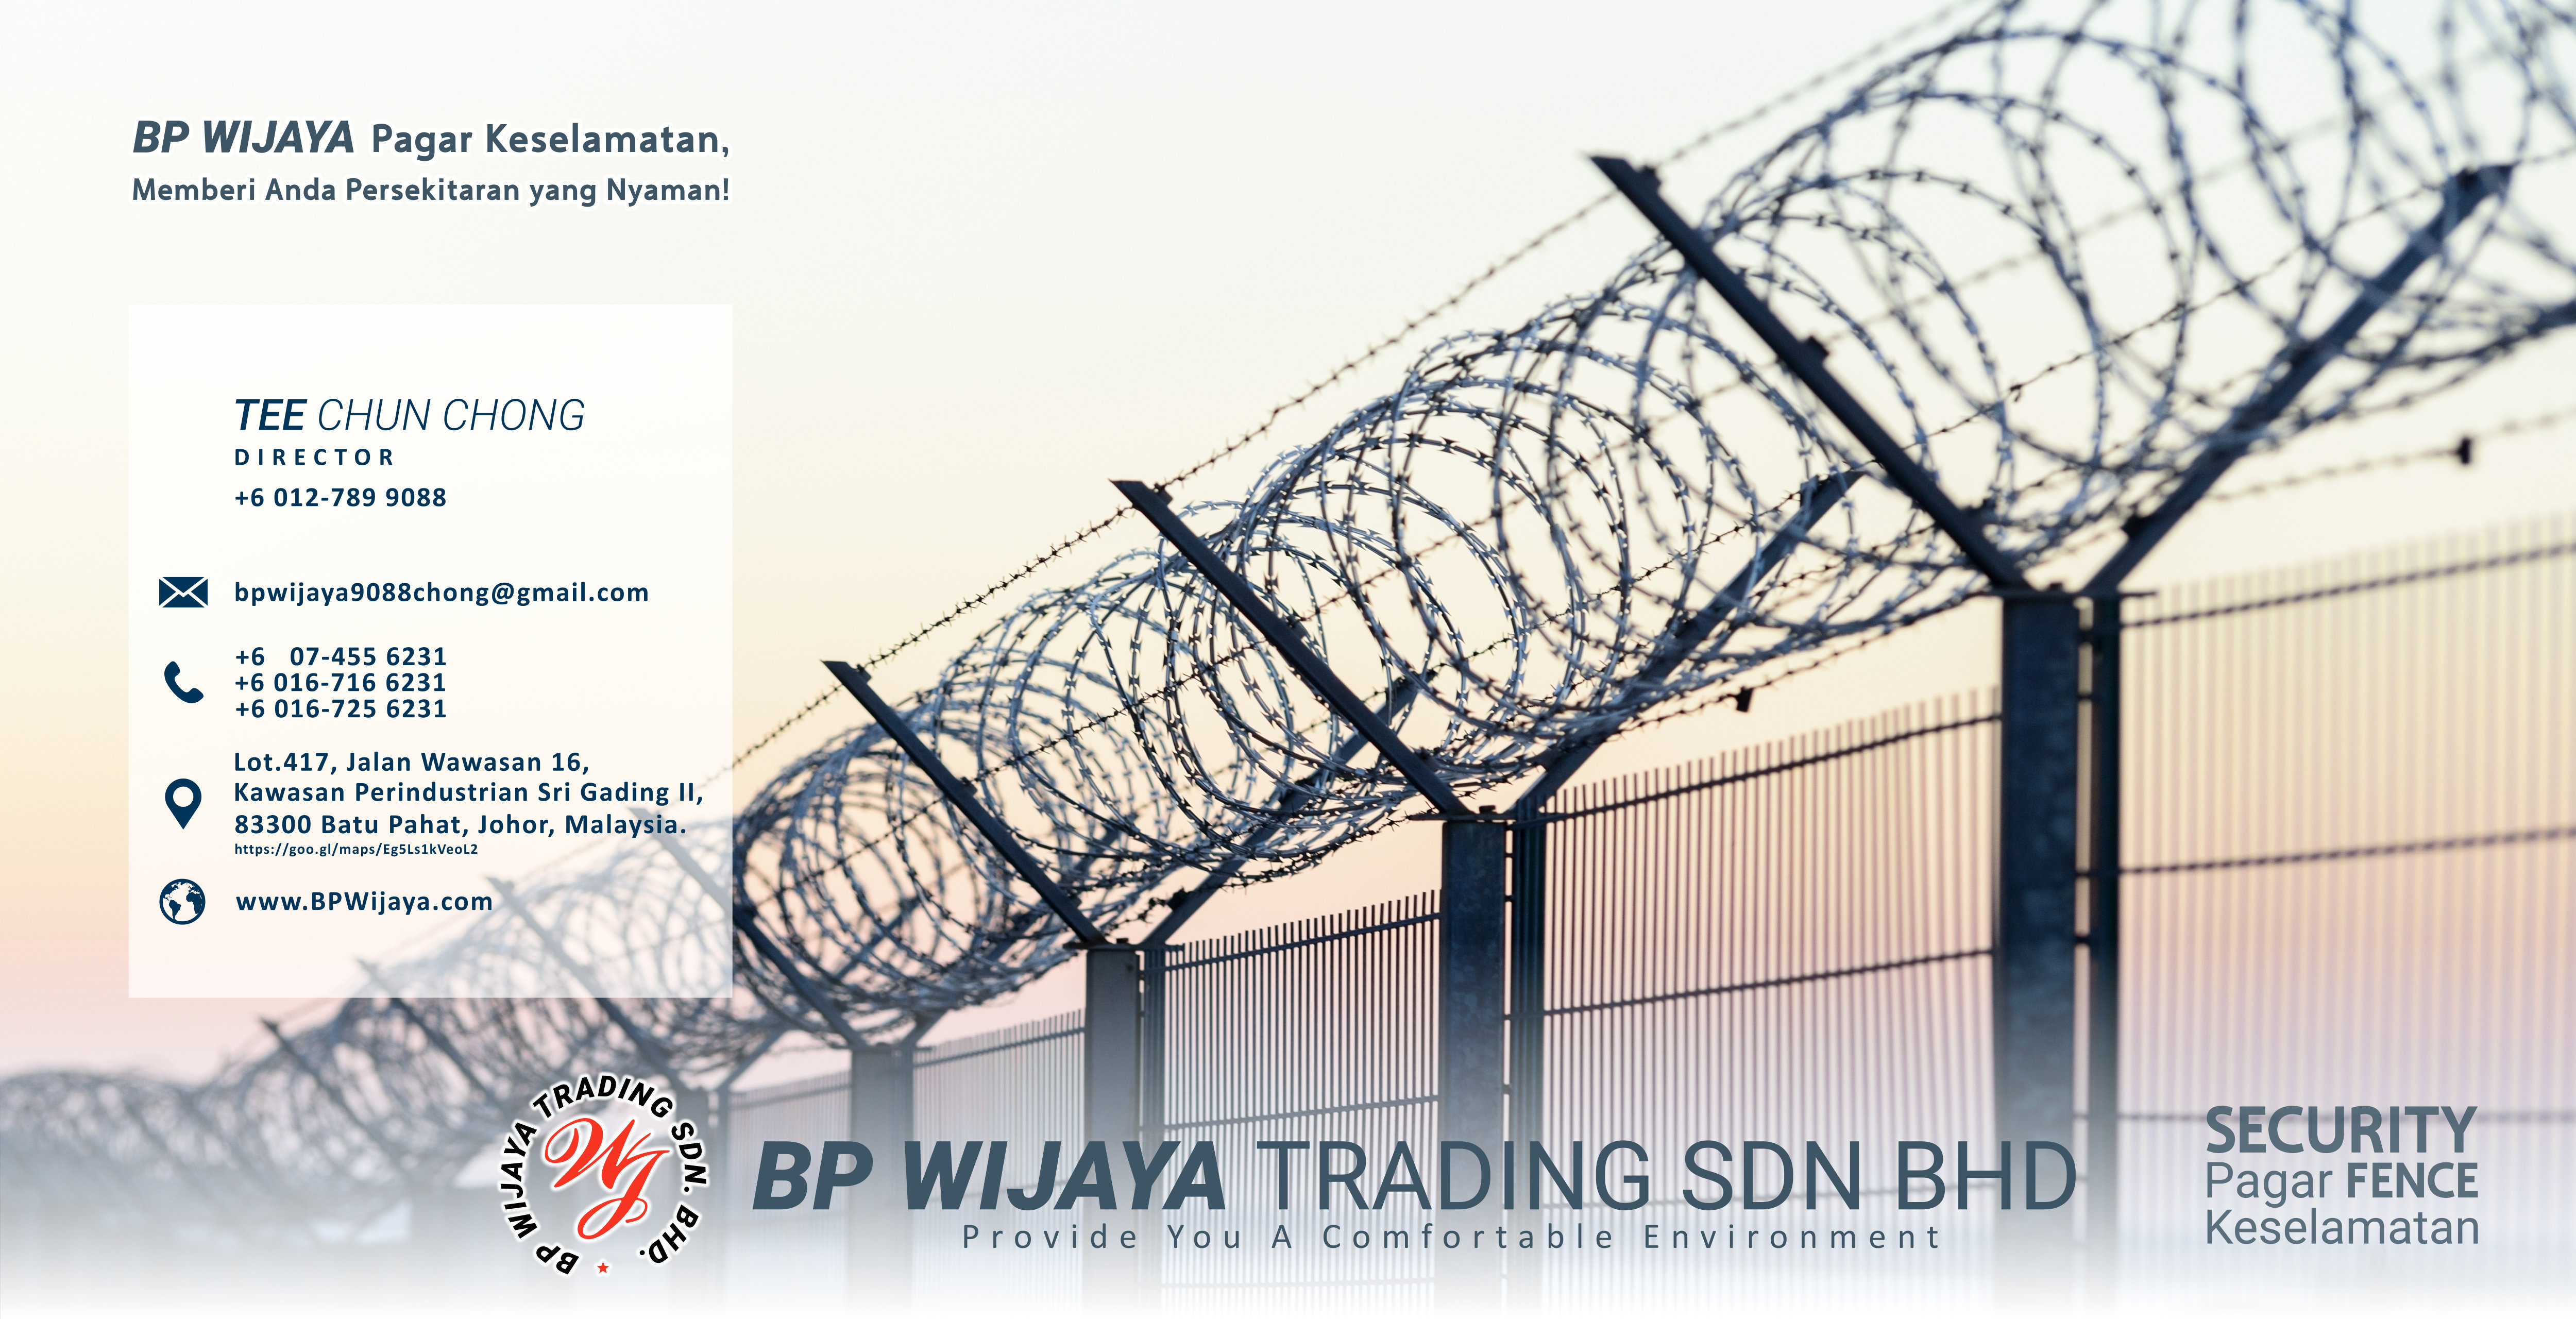 BP Wijaya Trading Sdn Bhd Fence Malaysia Selangor Kuala Lumpur manufacturer of safety fences building materials for housing construction site Security fencing factory fence house fence A01-002